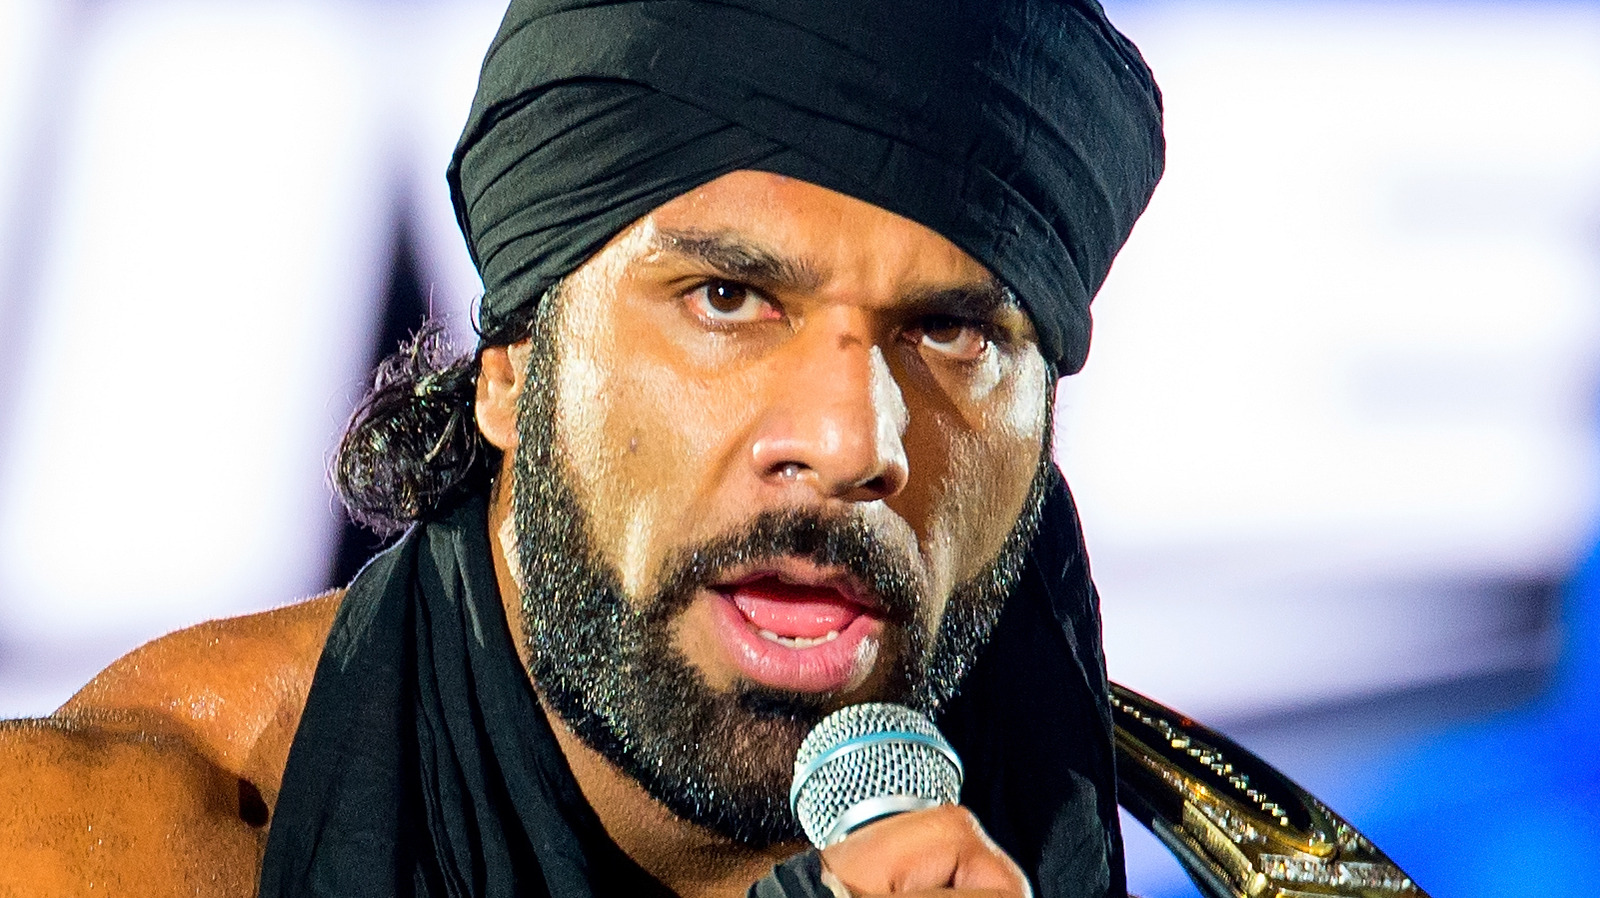 Jinder Mahal's Quest for Glory: A WWE Champion's Undying Ambition